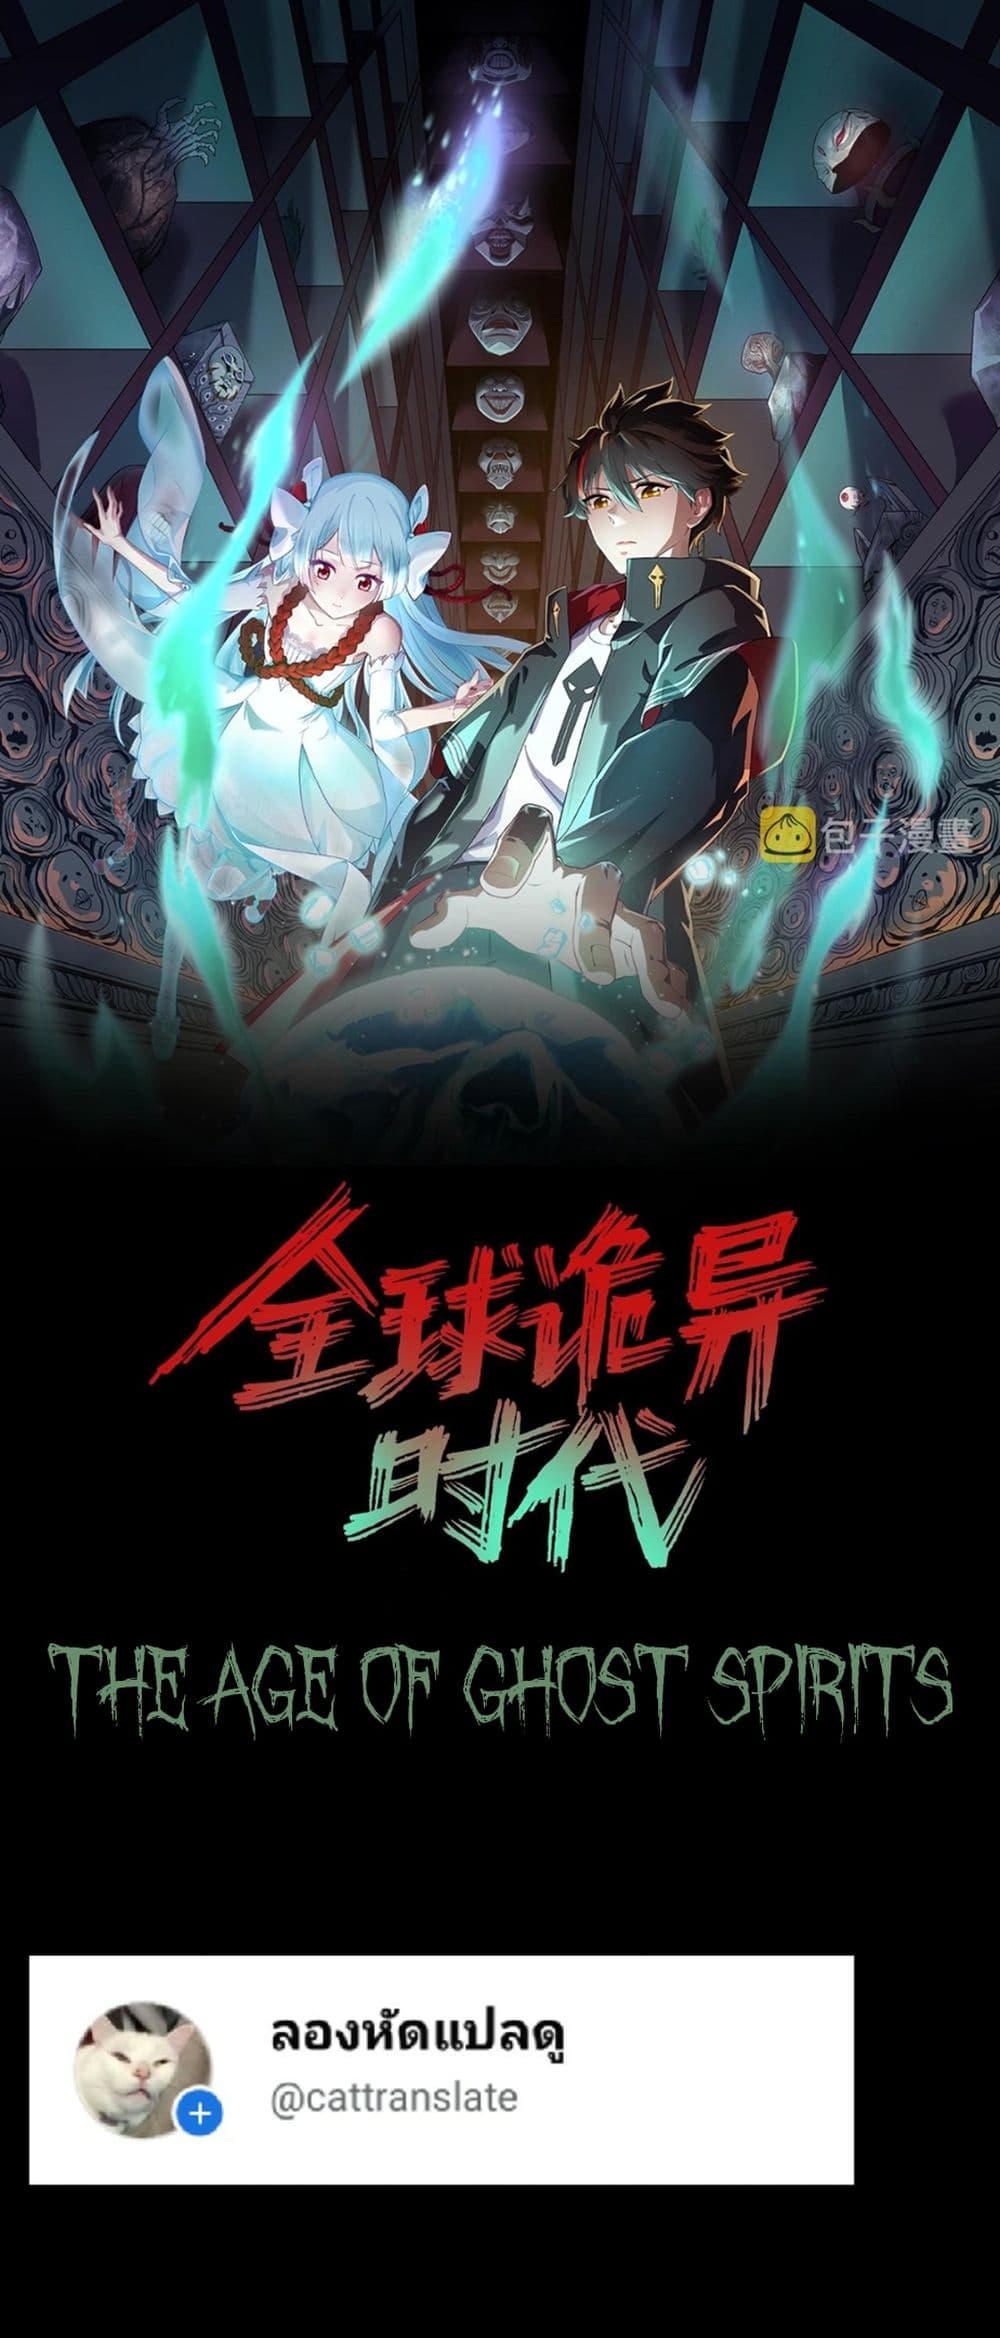 The Age of Ghost Spirits à¸à¸­à¸à¸à¸µà¹ 15 (1)